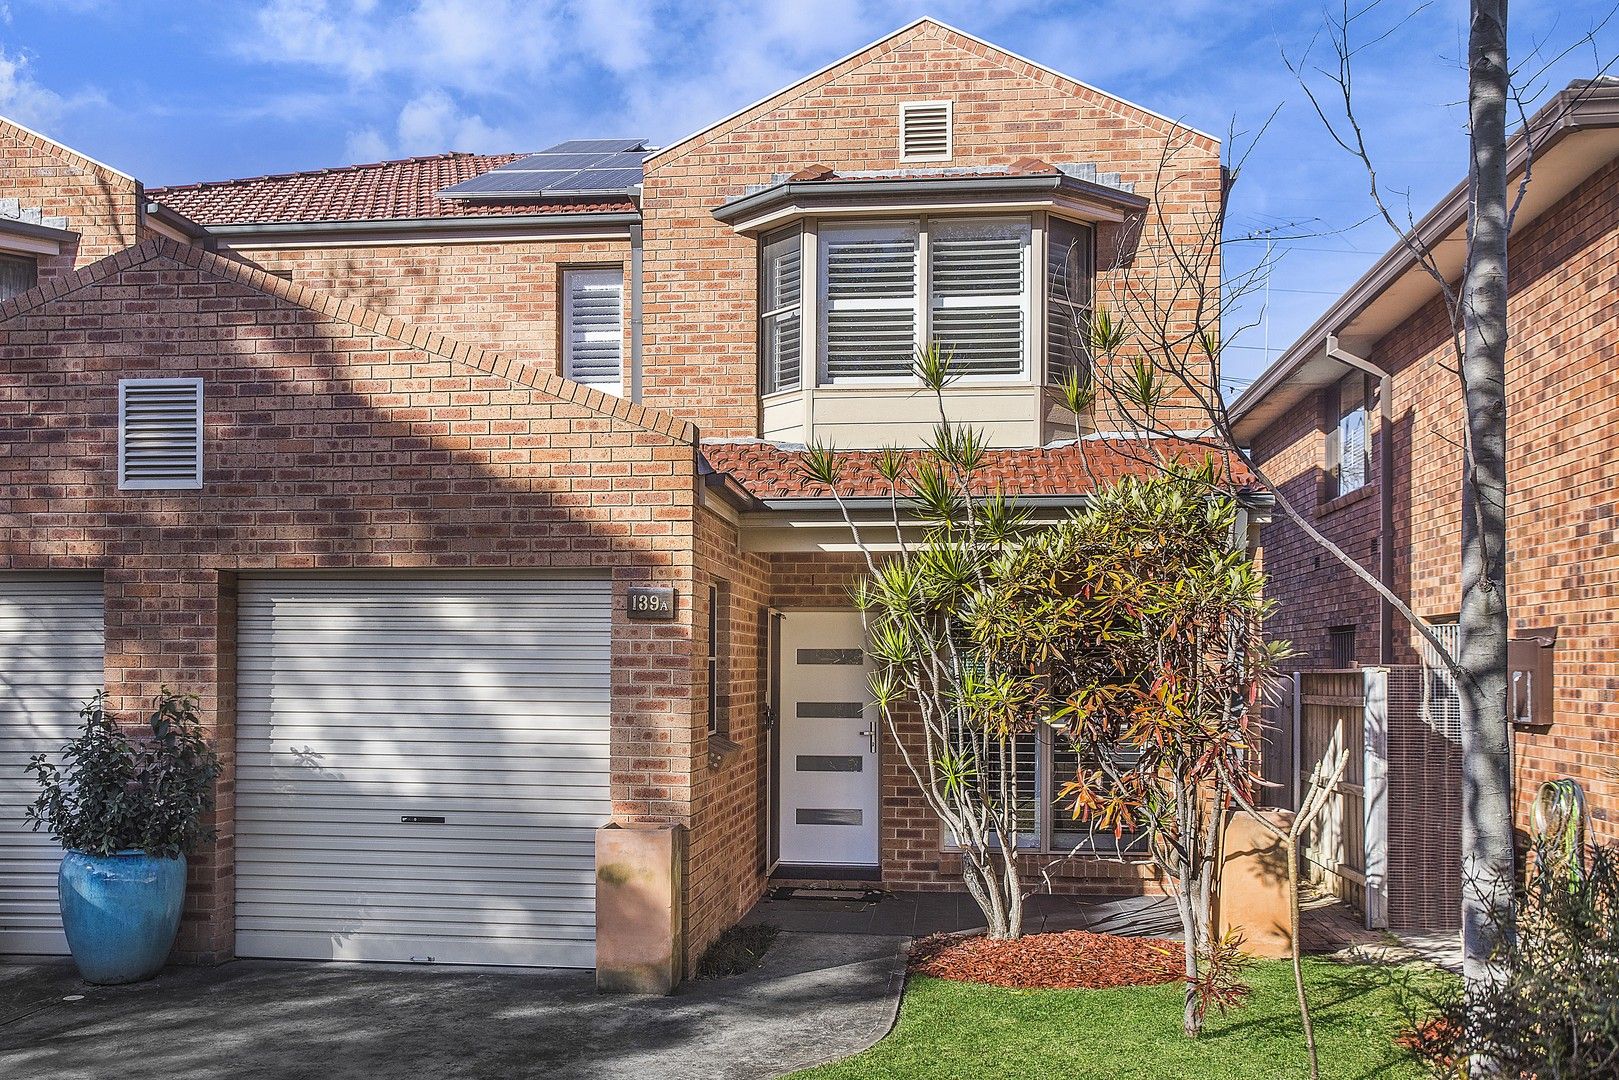 139A Hillcrest Ave, Greenacre NSW 2190, Image 0